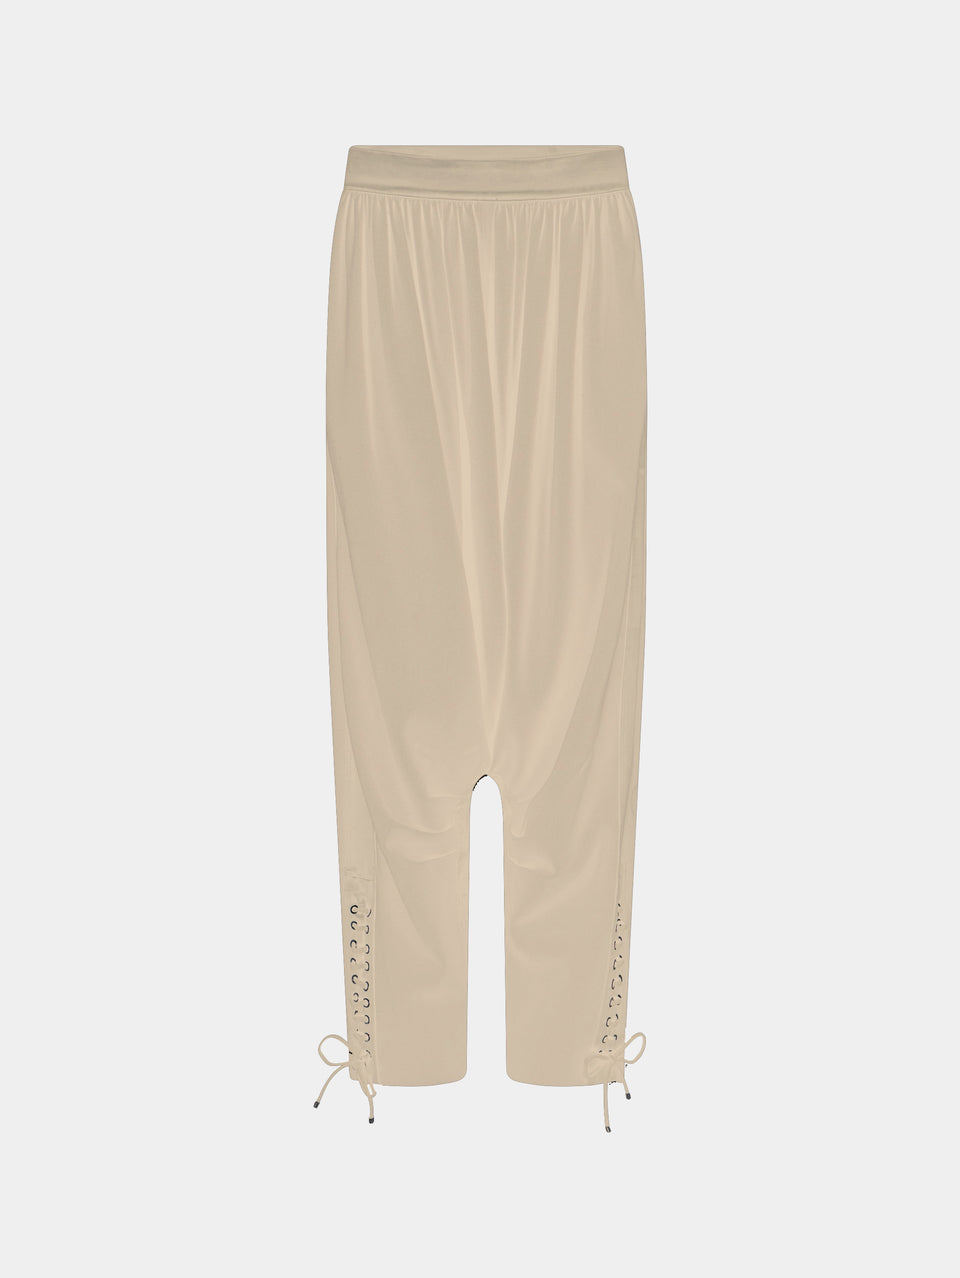 Tailored baggy sand colored pants in wool